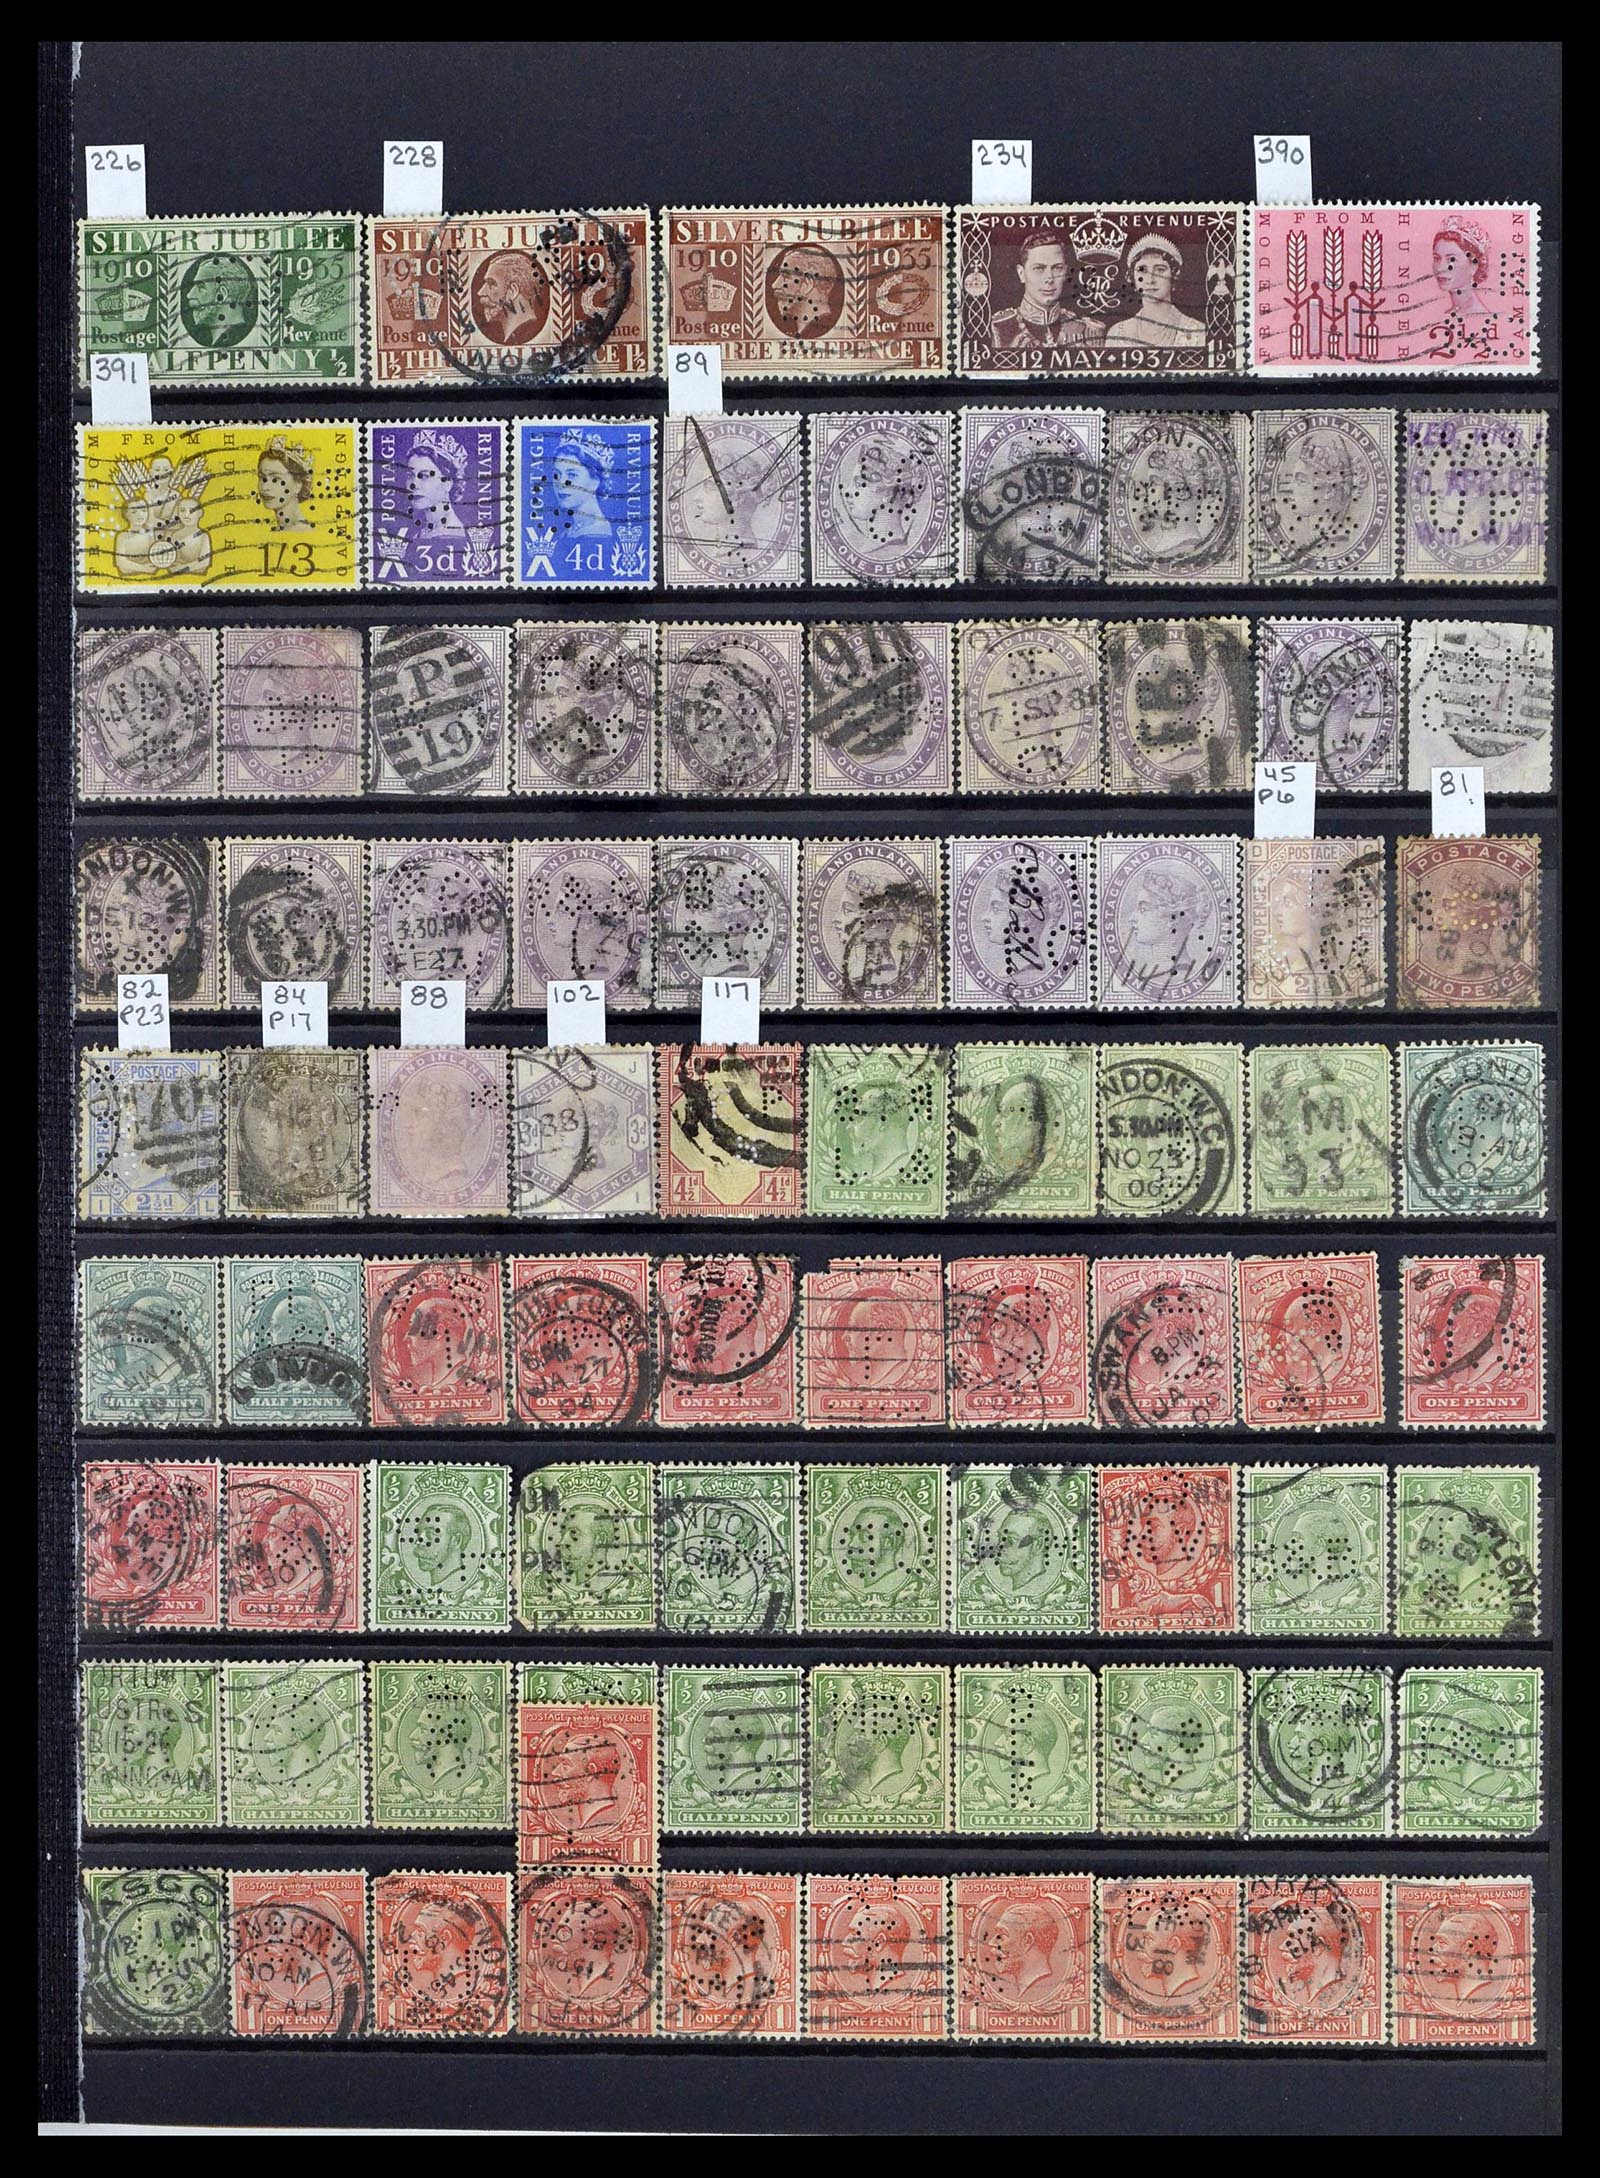 39196 0118 - Stamp collection 39196 Great Britain 1844-1955.